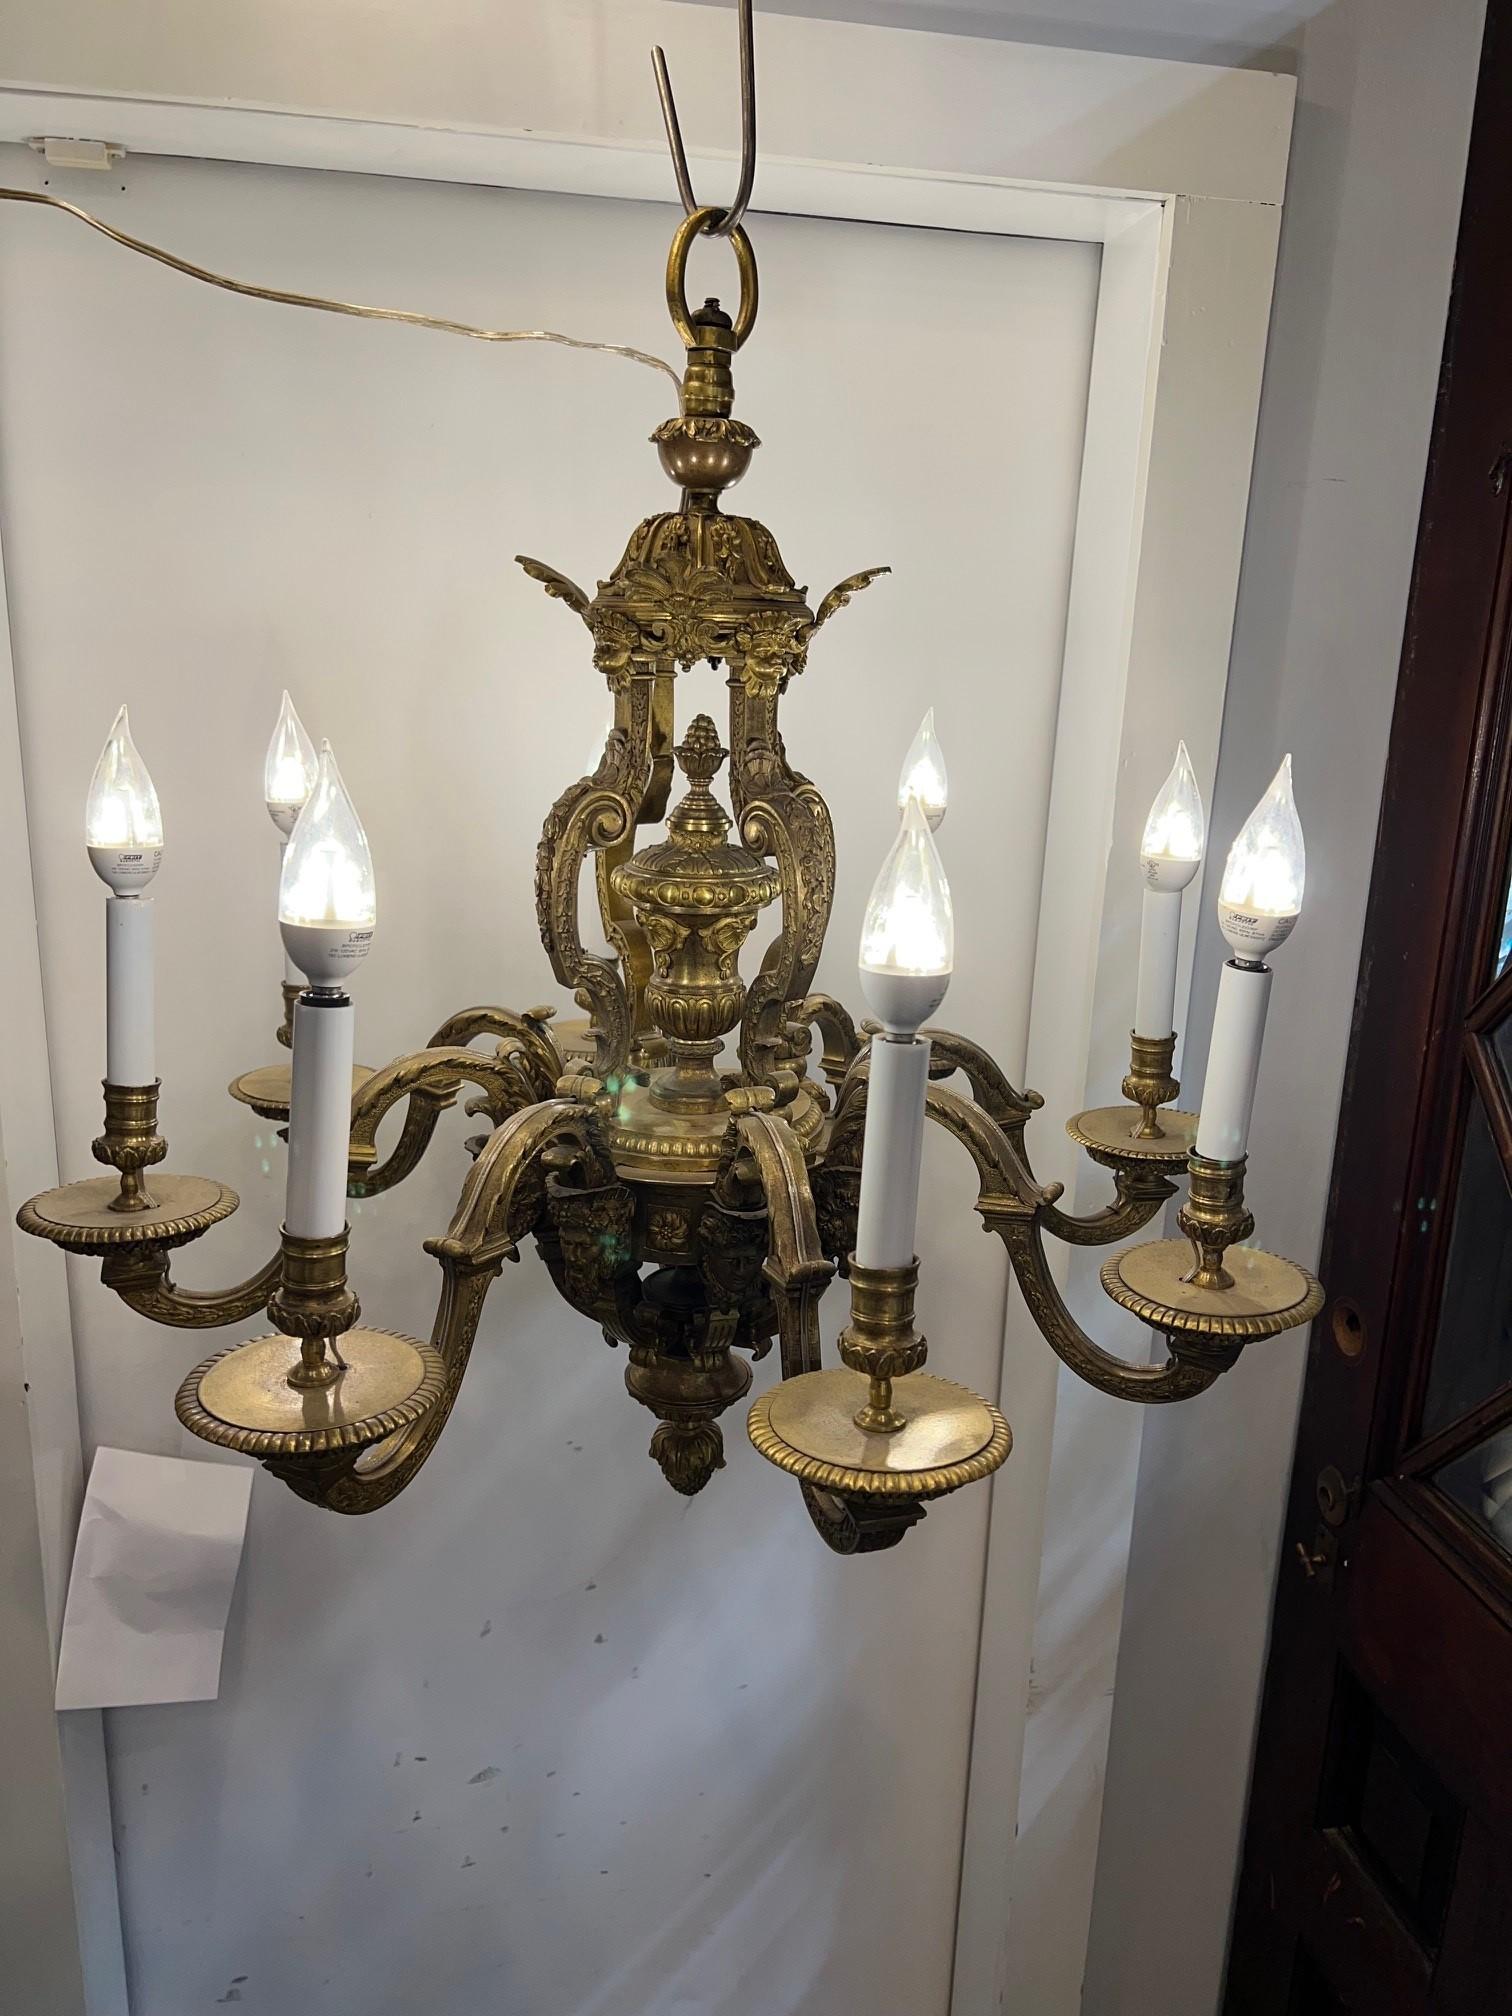 Late 19th Century antique bronze French chandelier with male and female busts under each arm. This is a very ornate bronze chandelier and a practical size that would look great over a table or center island. The male bust looks to be Bacchus the God